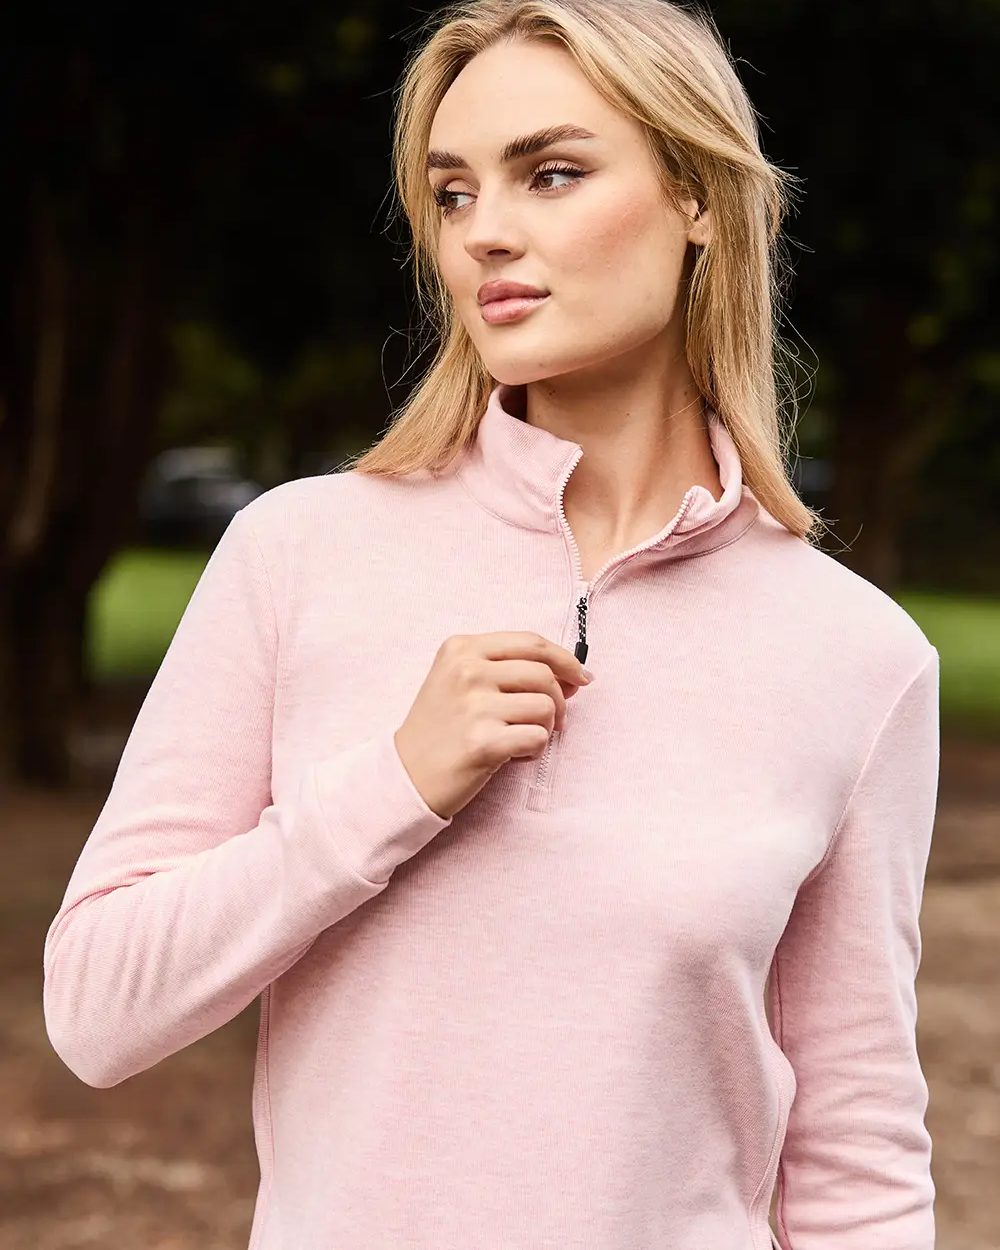 Blush Coloured WeatherBeeta London Layer Long Sleeve Top On A blurry Background 